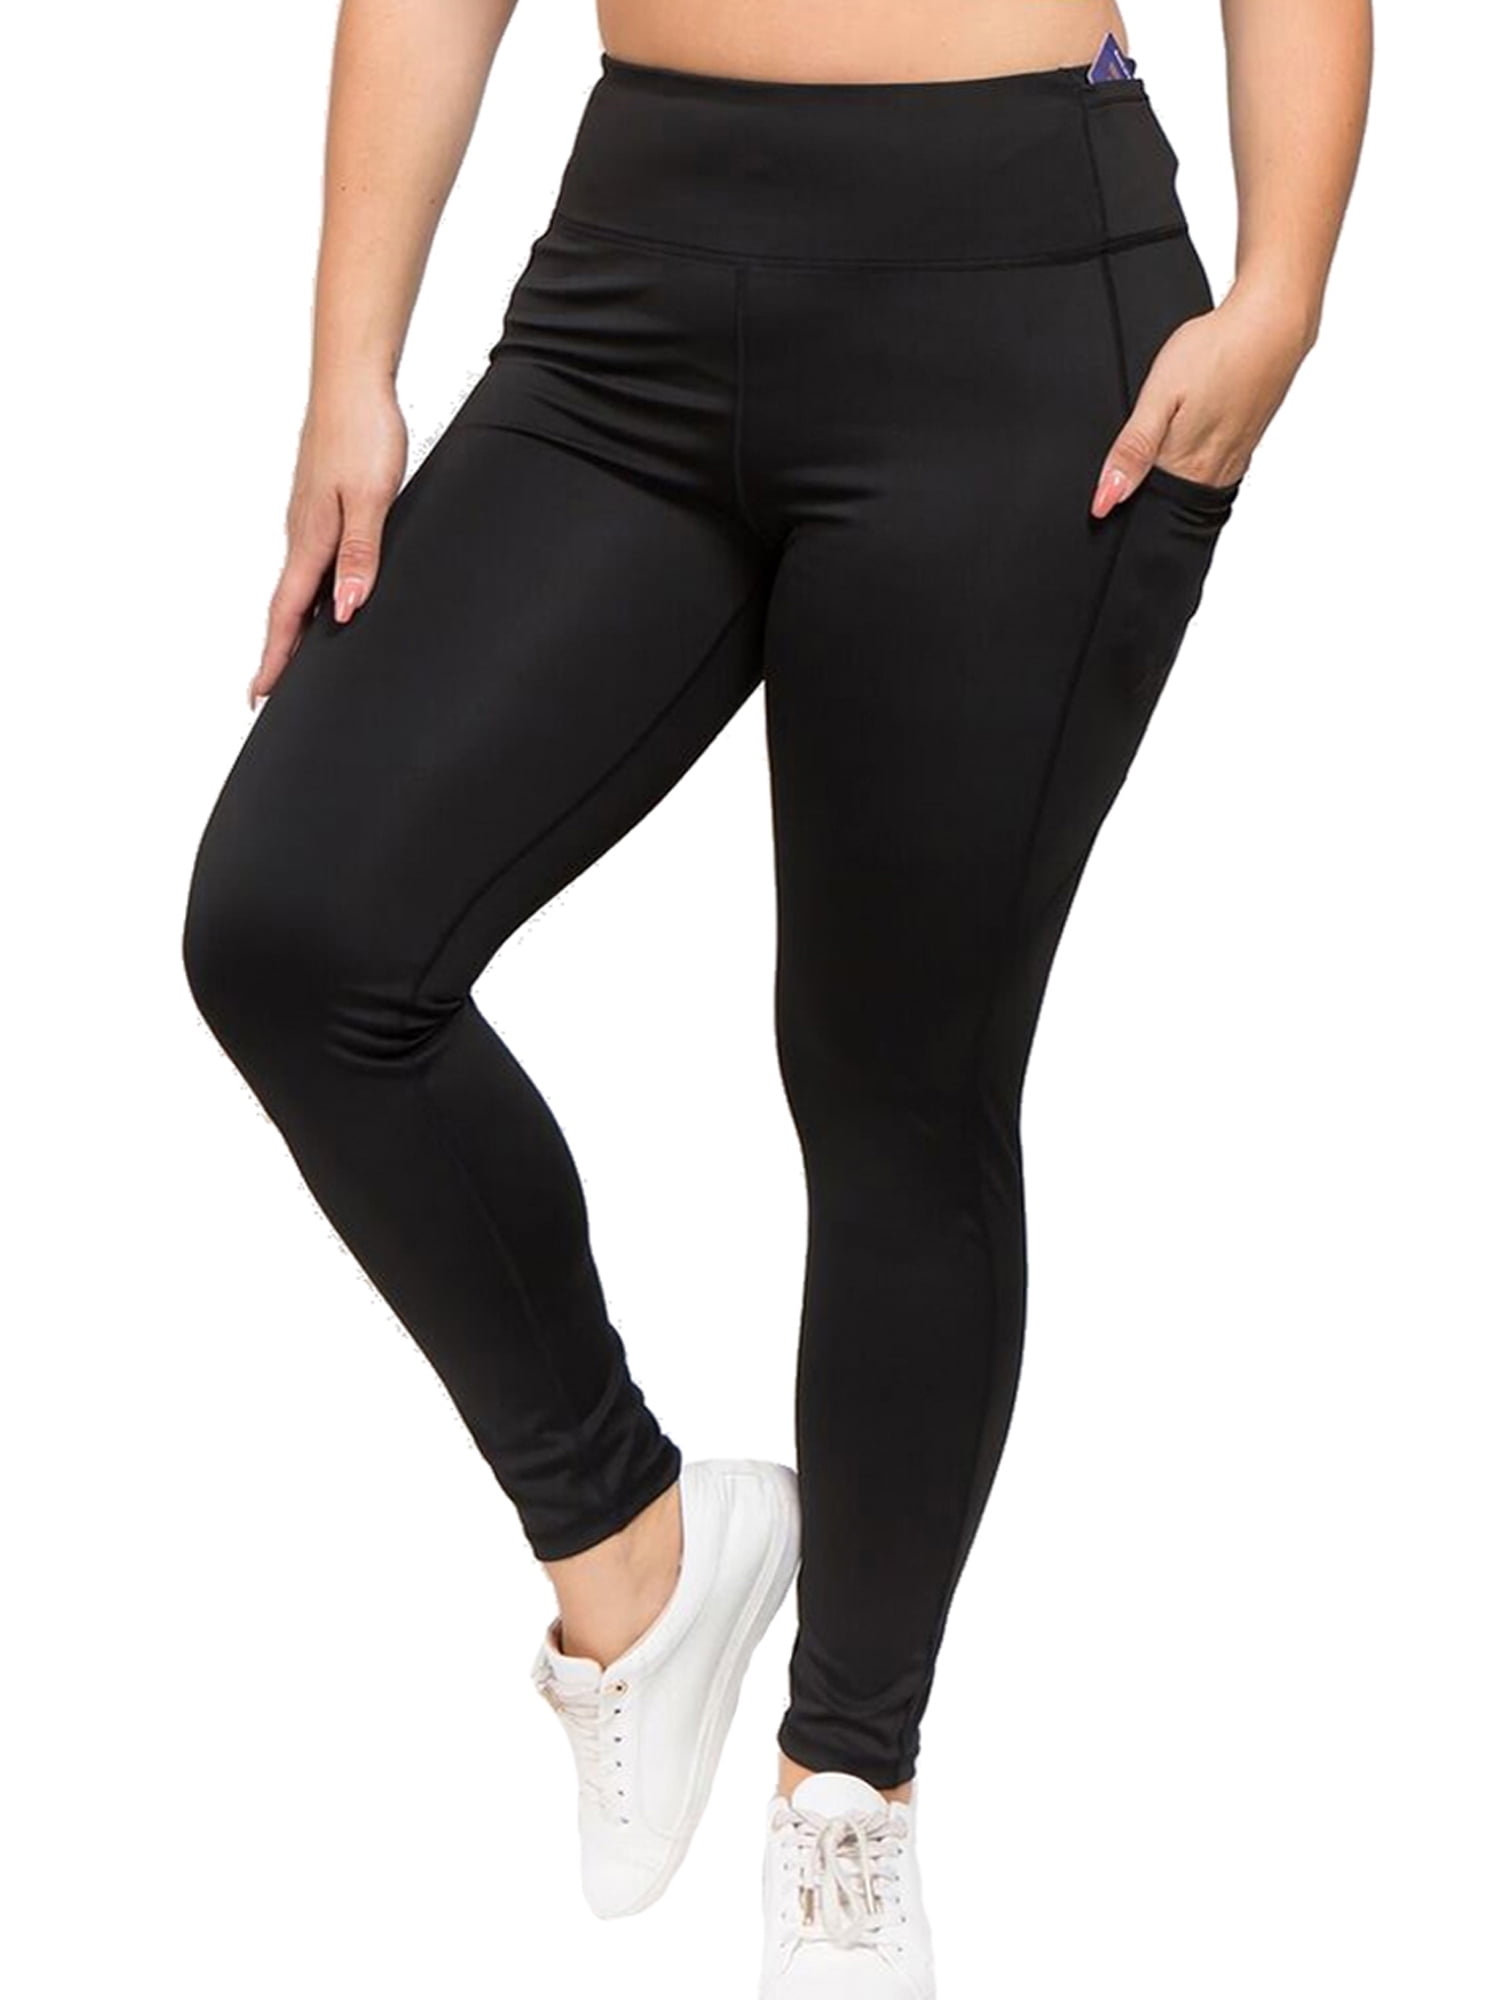 Black Plus Size High Waist Activewear Leggings With Pockets Size X